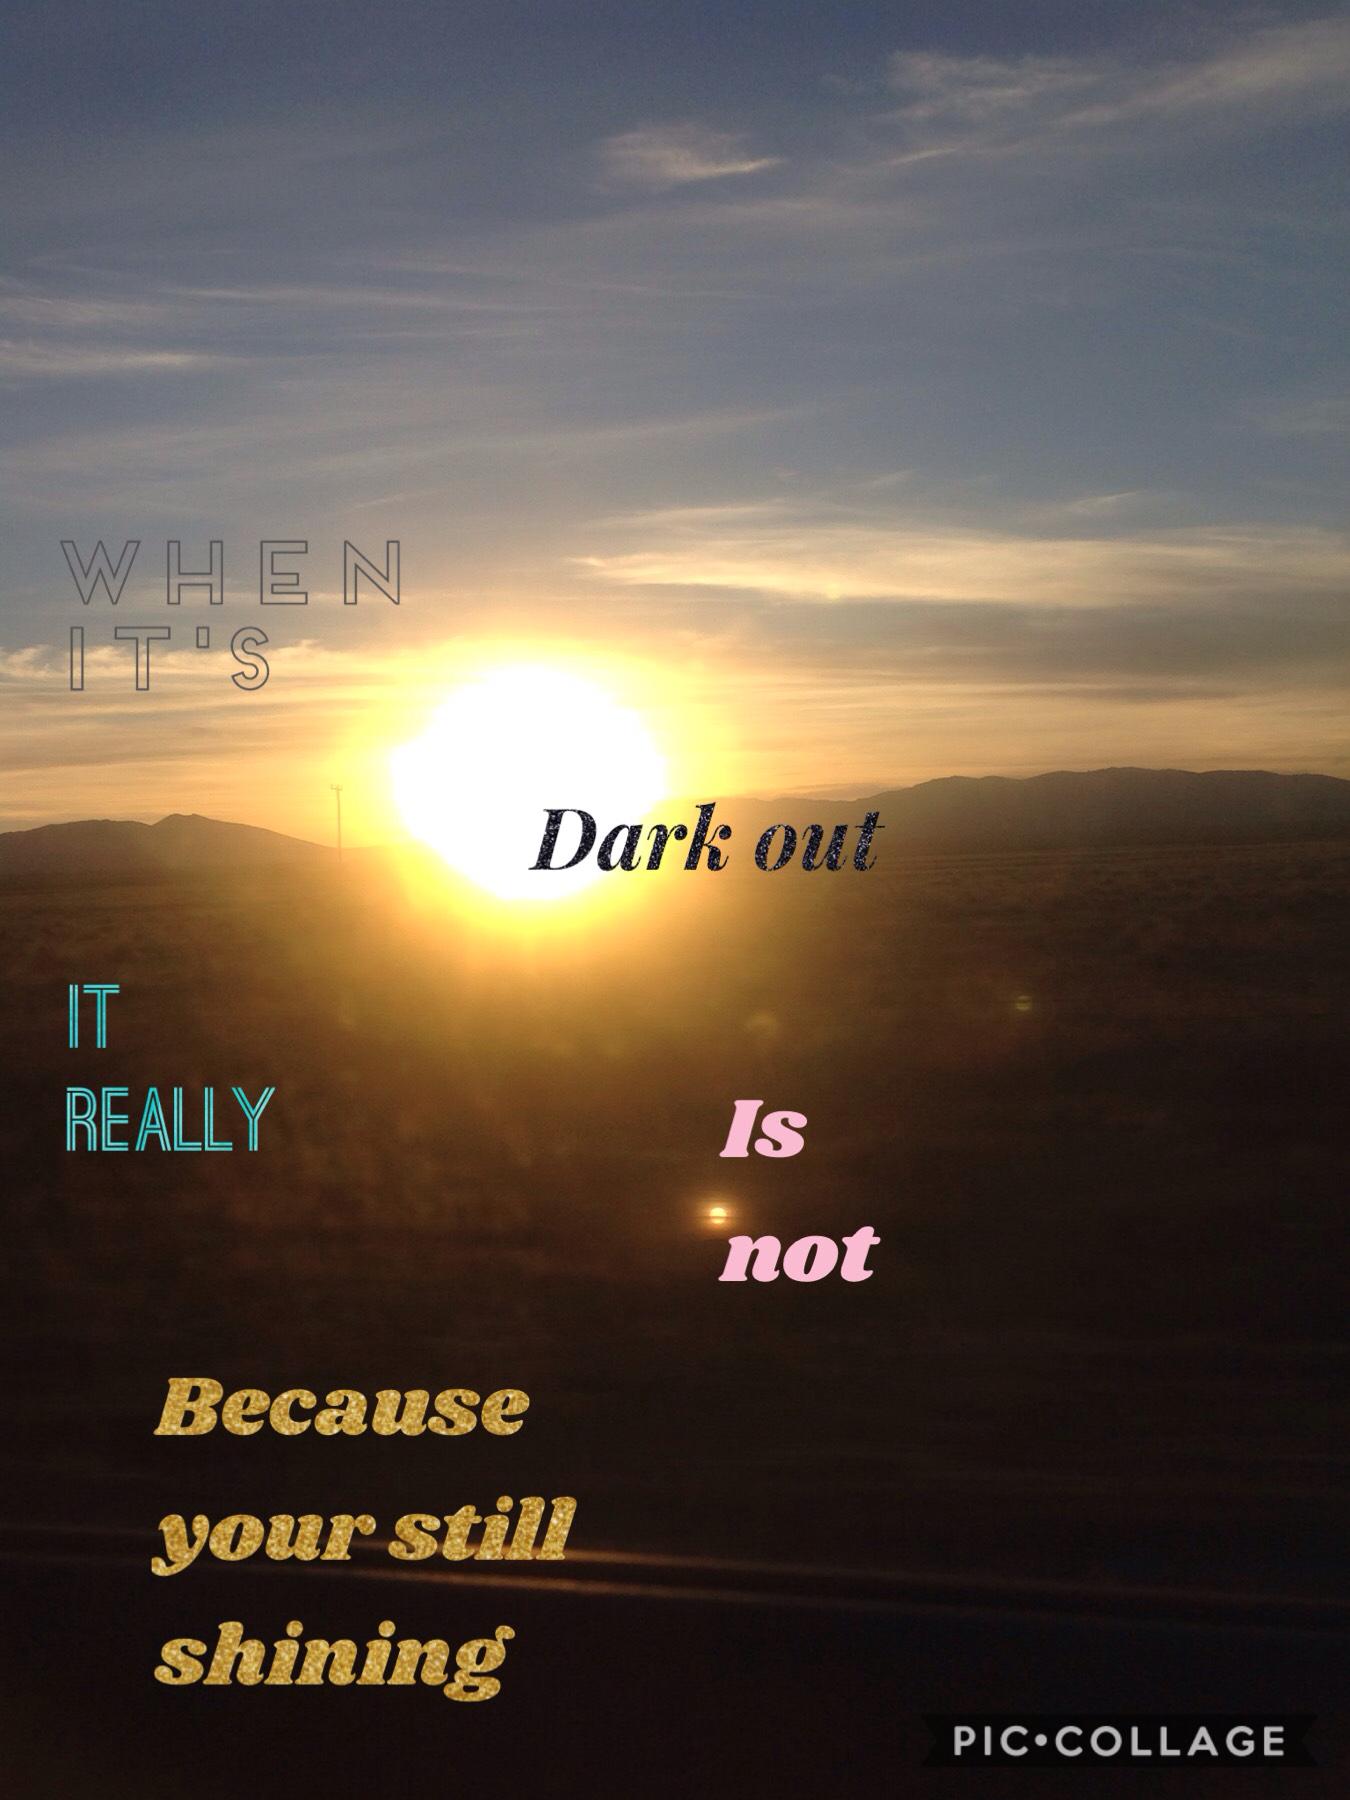 When it's dark out it really is not because your still shining 